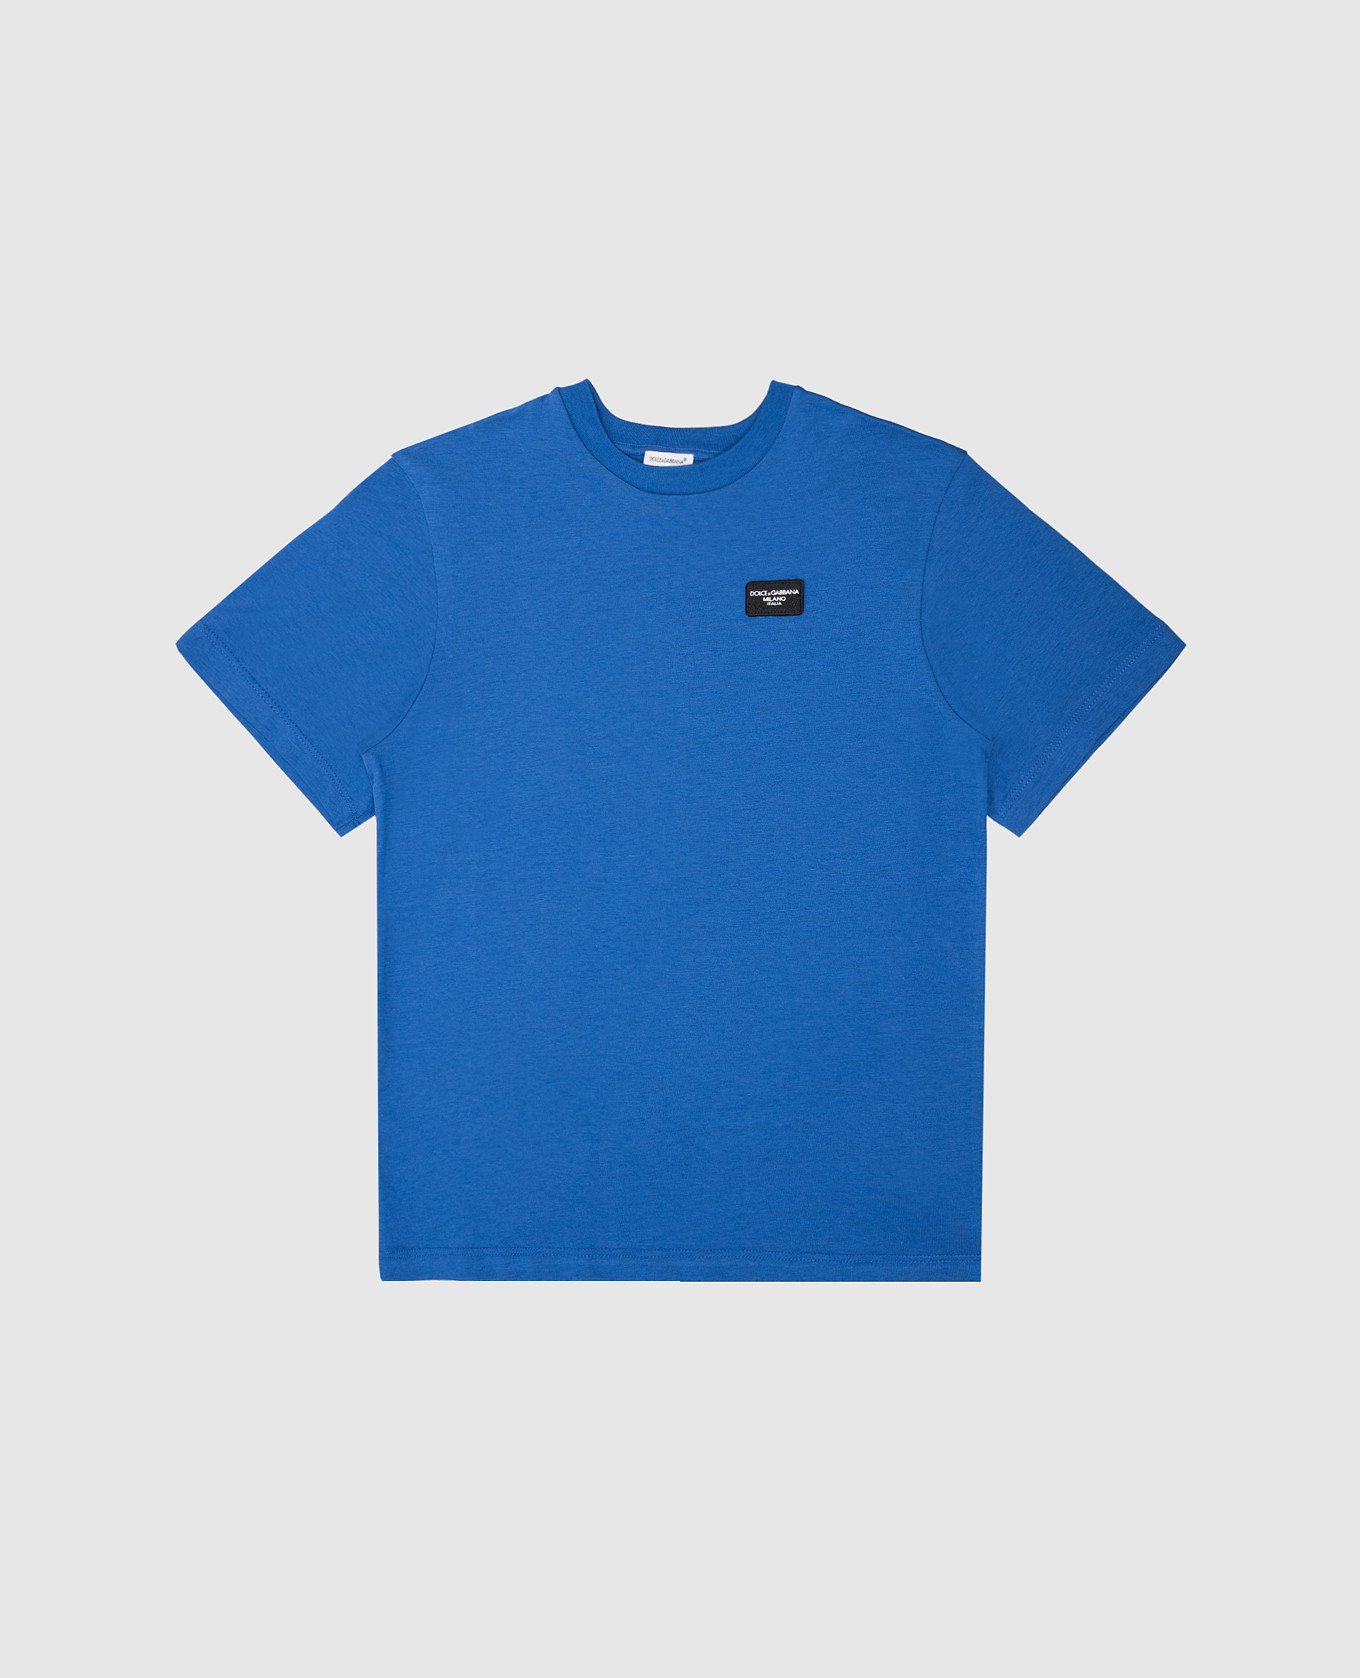 Children's blue t-shirt with logo patch